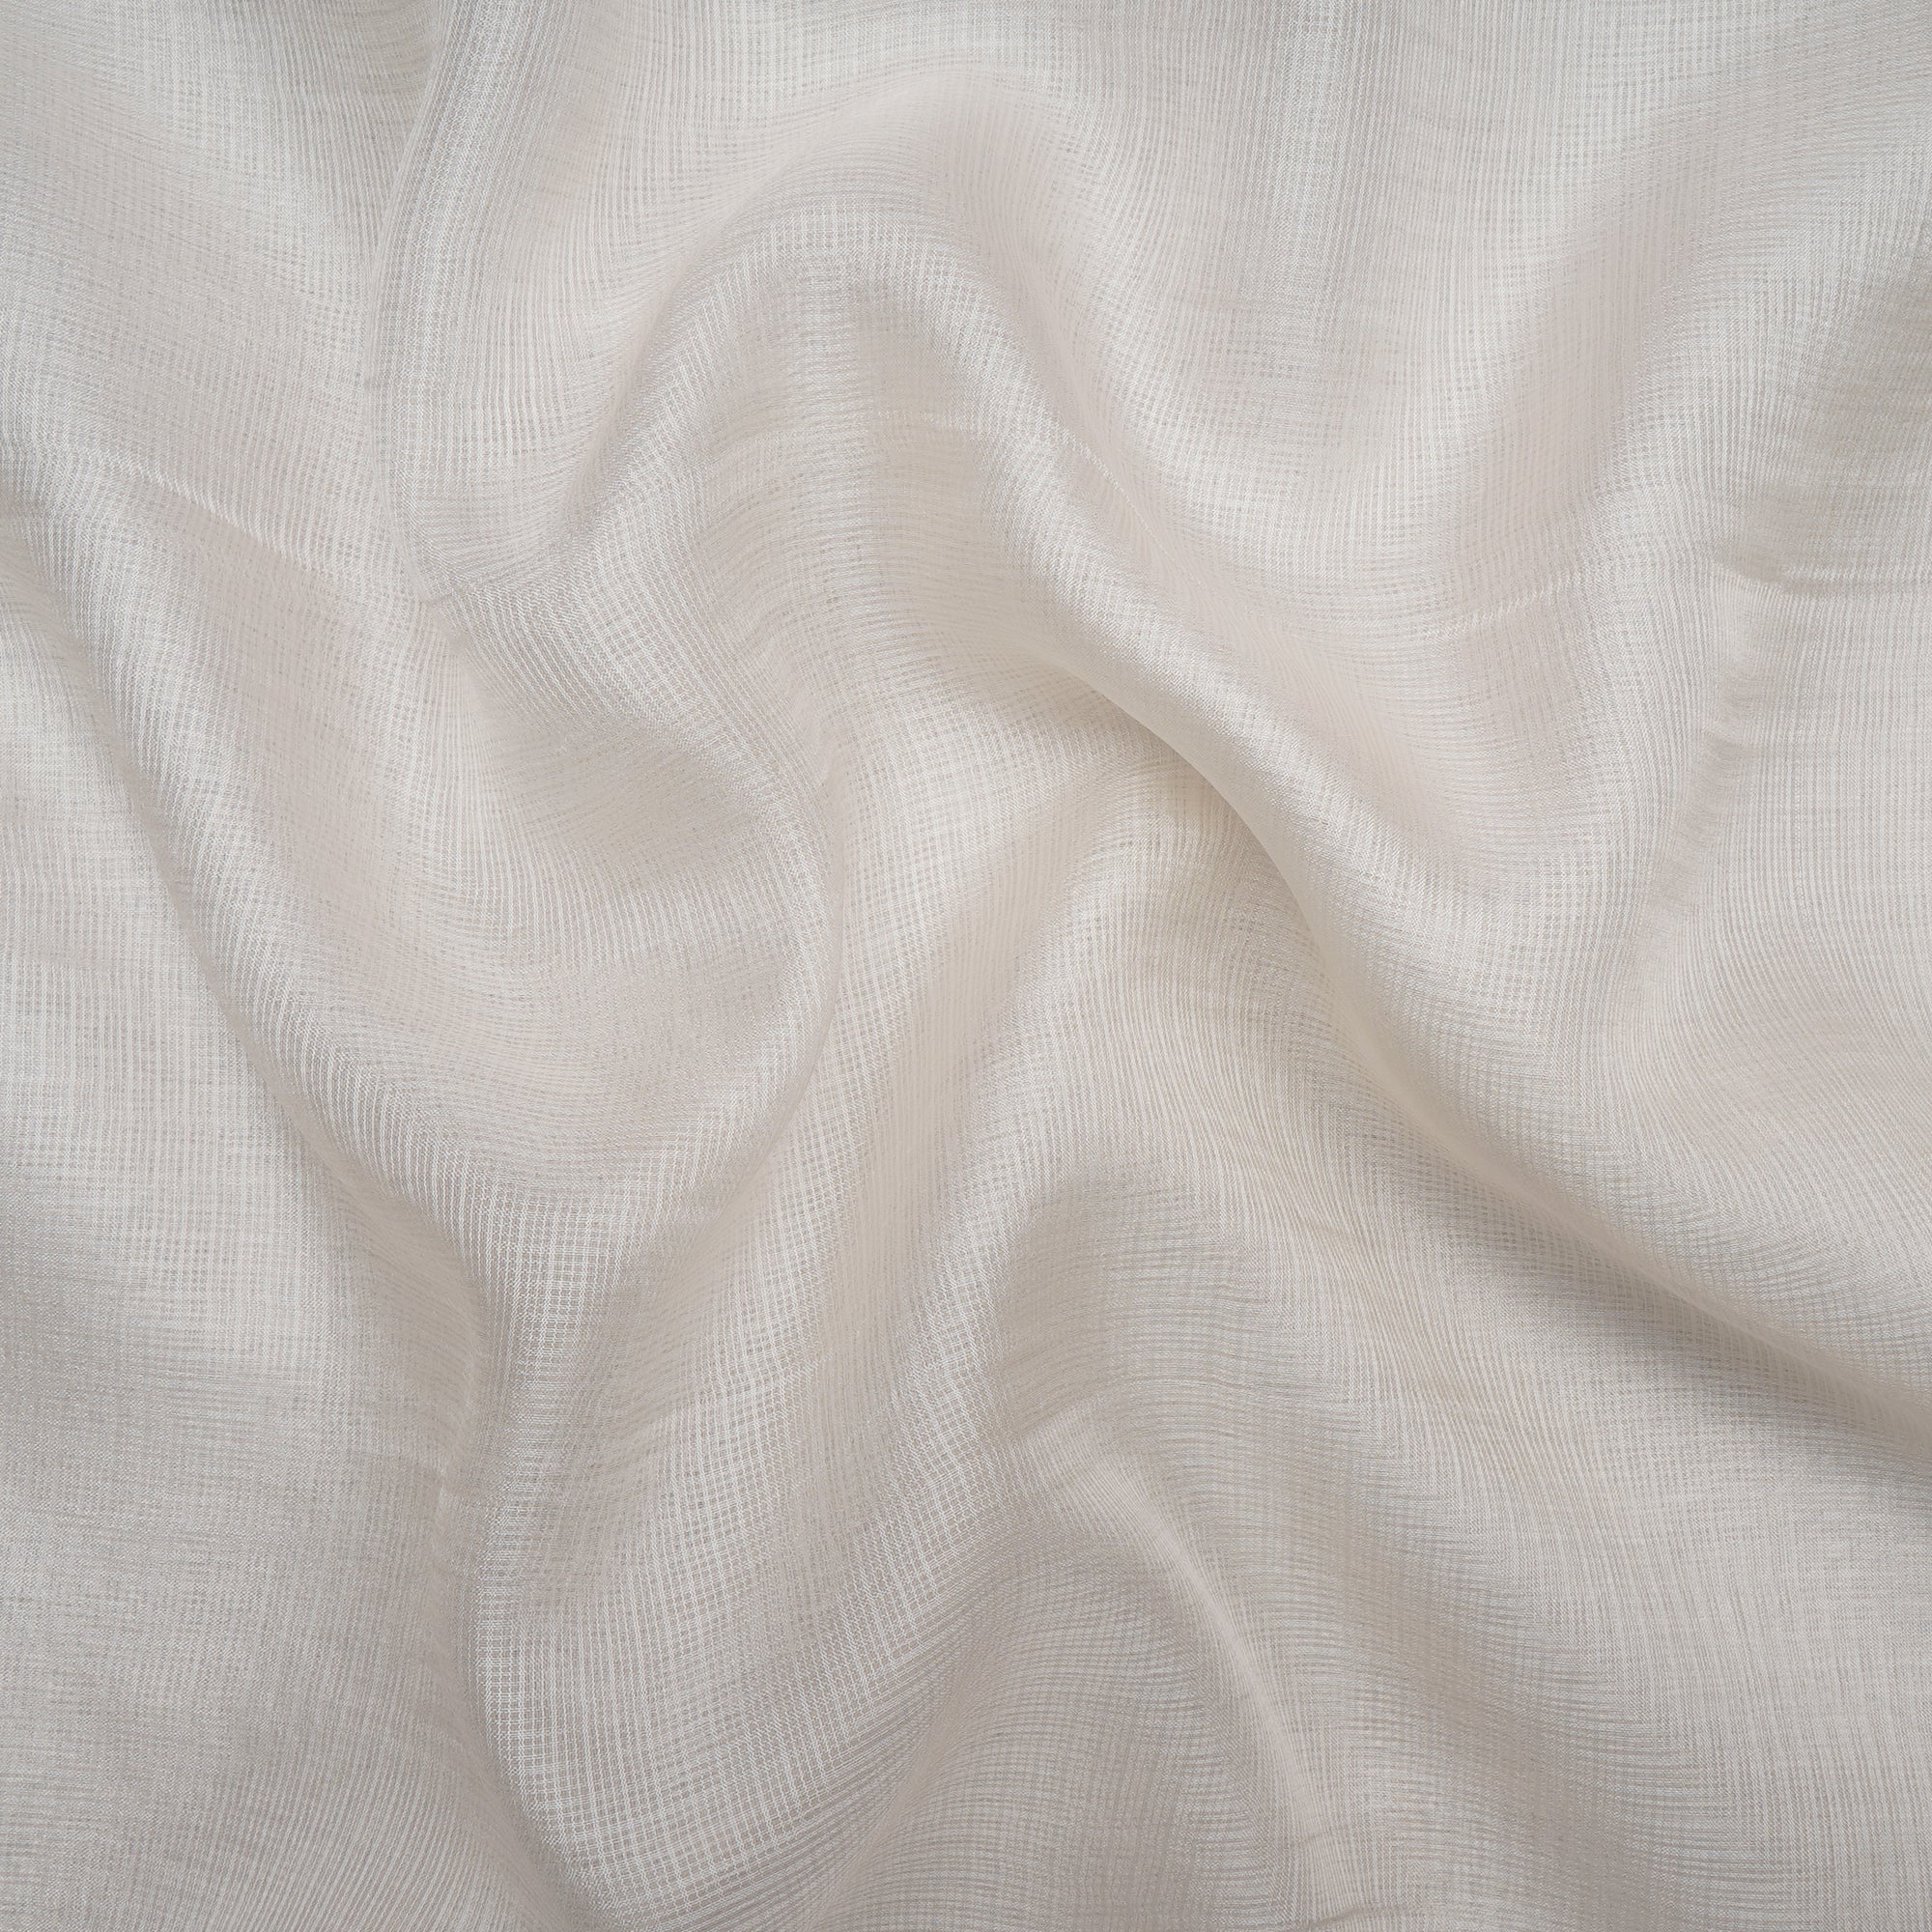 Off White Dyeable Handwoven Tusser Kota Fabric